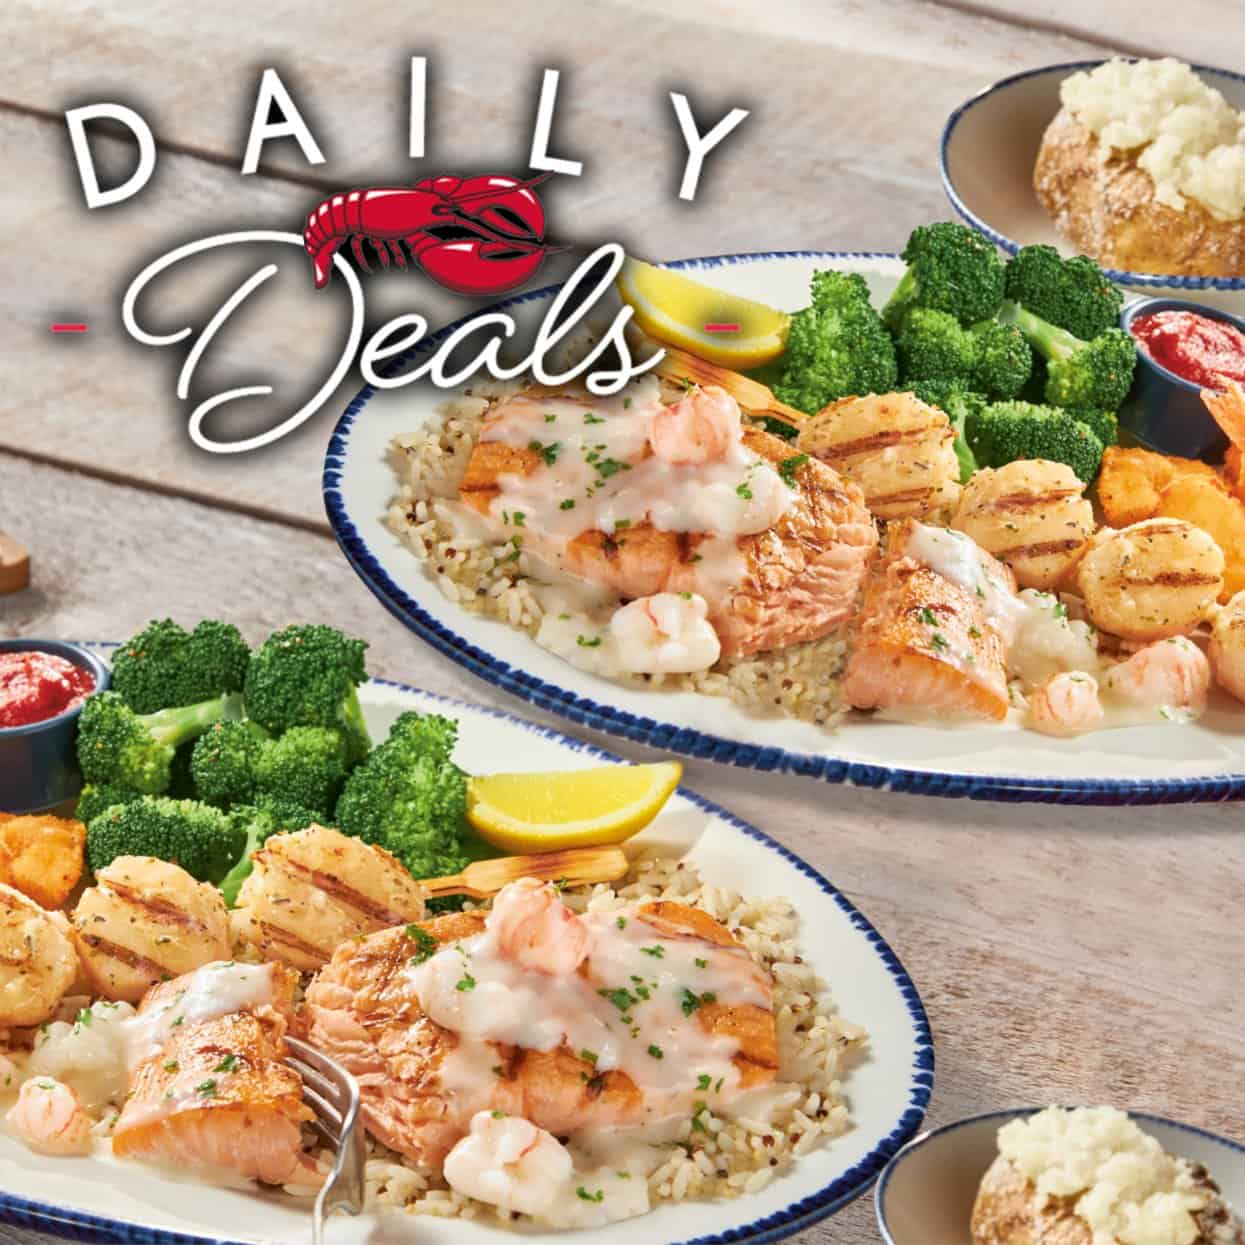 Red Lobster Serves Affordable Daily Deals Every Weekday - Mile High on the  Cheap